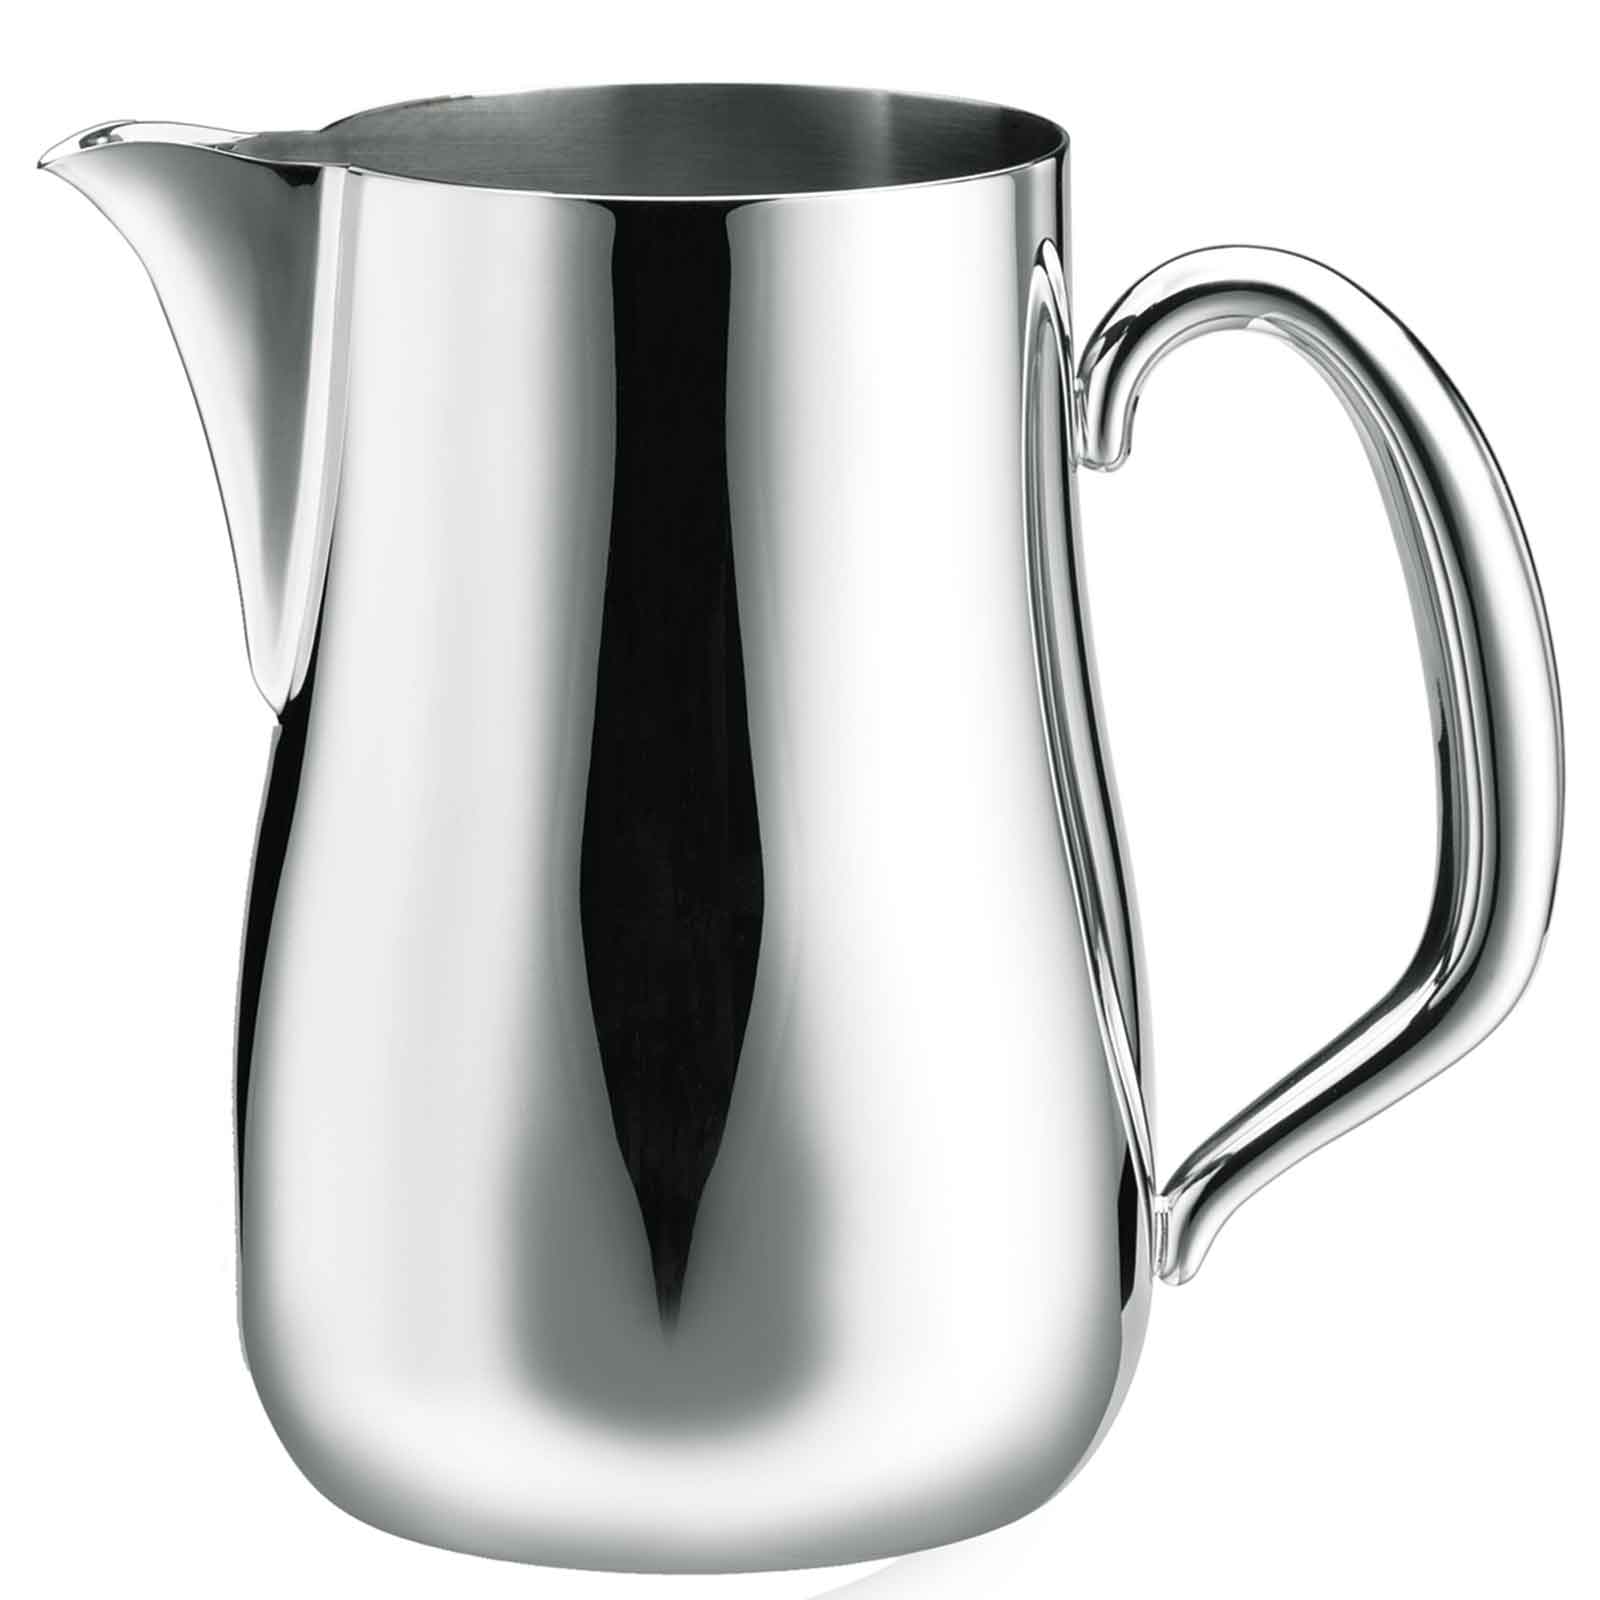 Walco Stainless CX522G Pitcher, Stainless Steel